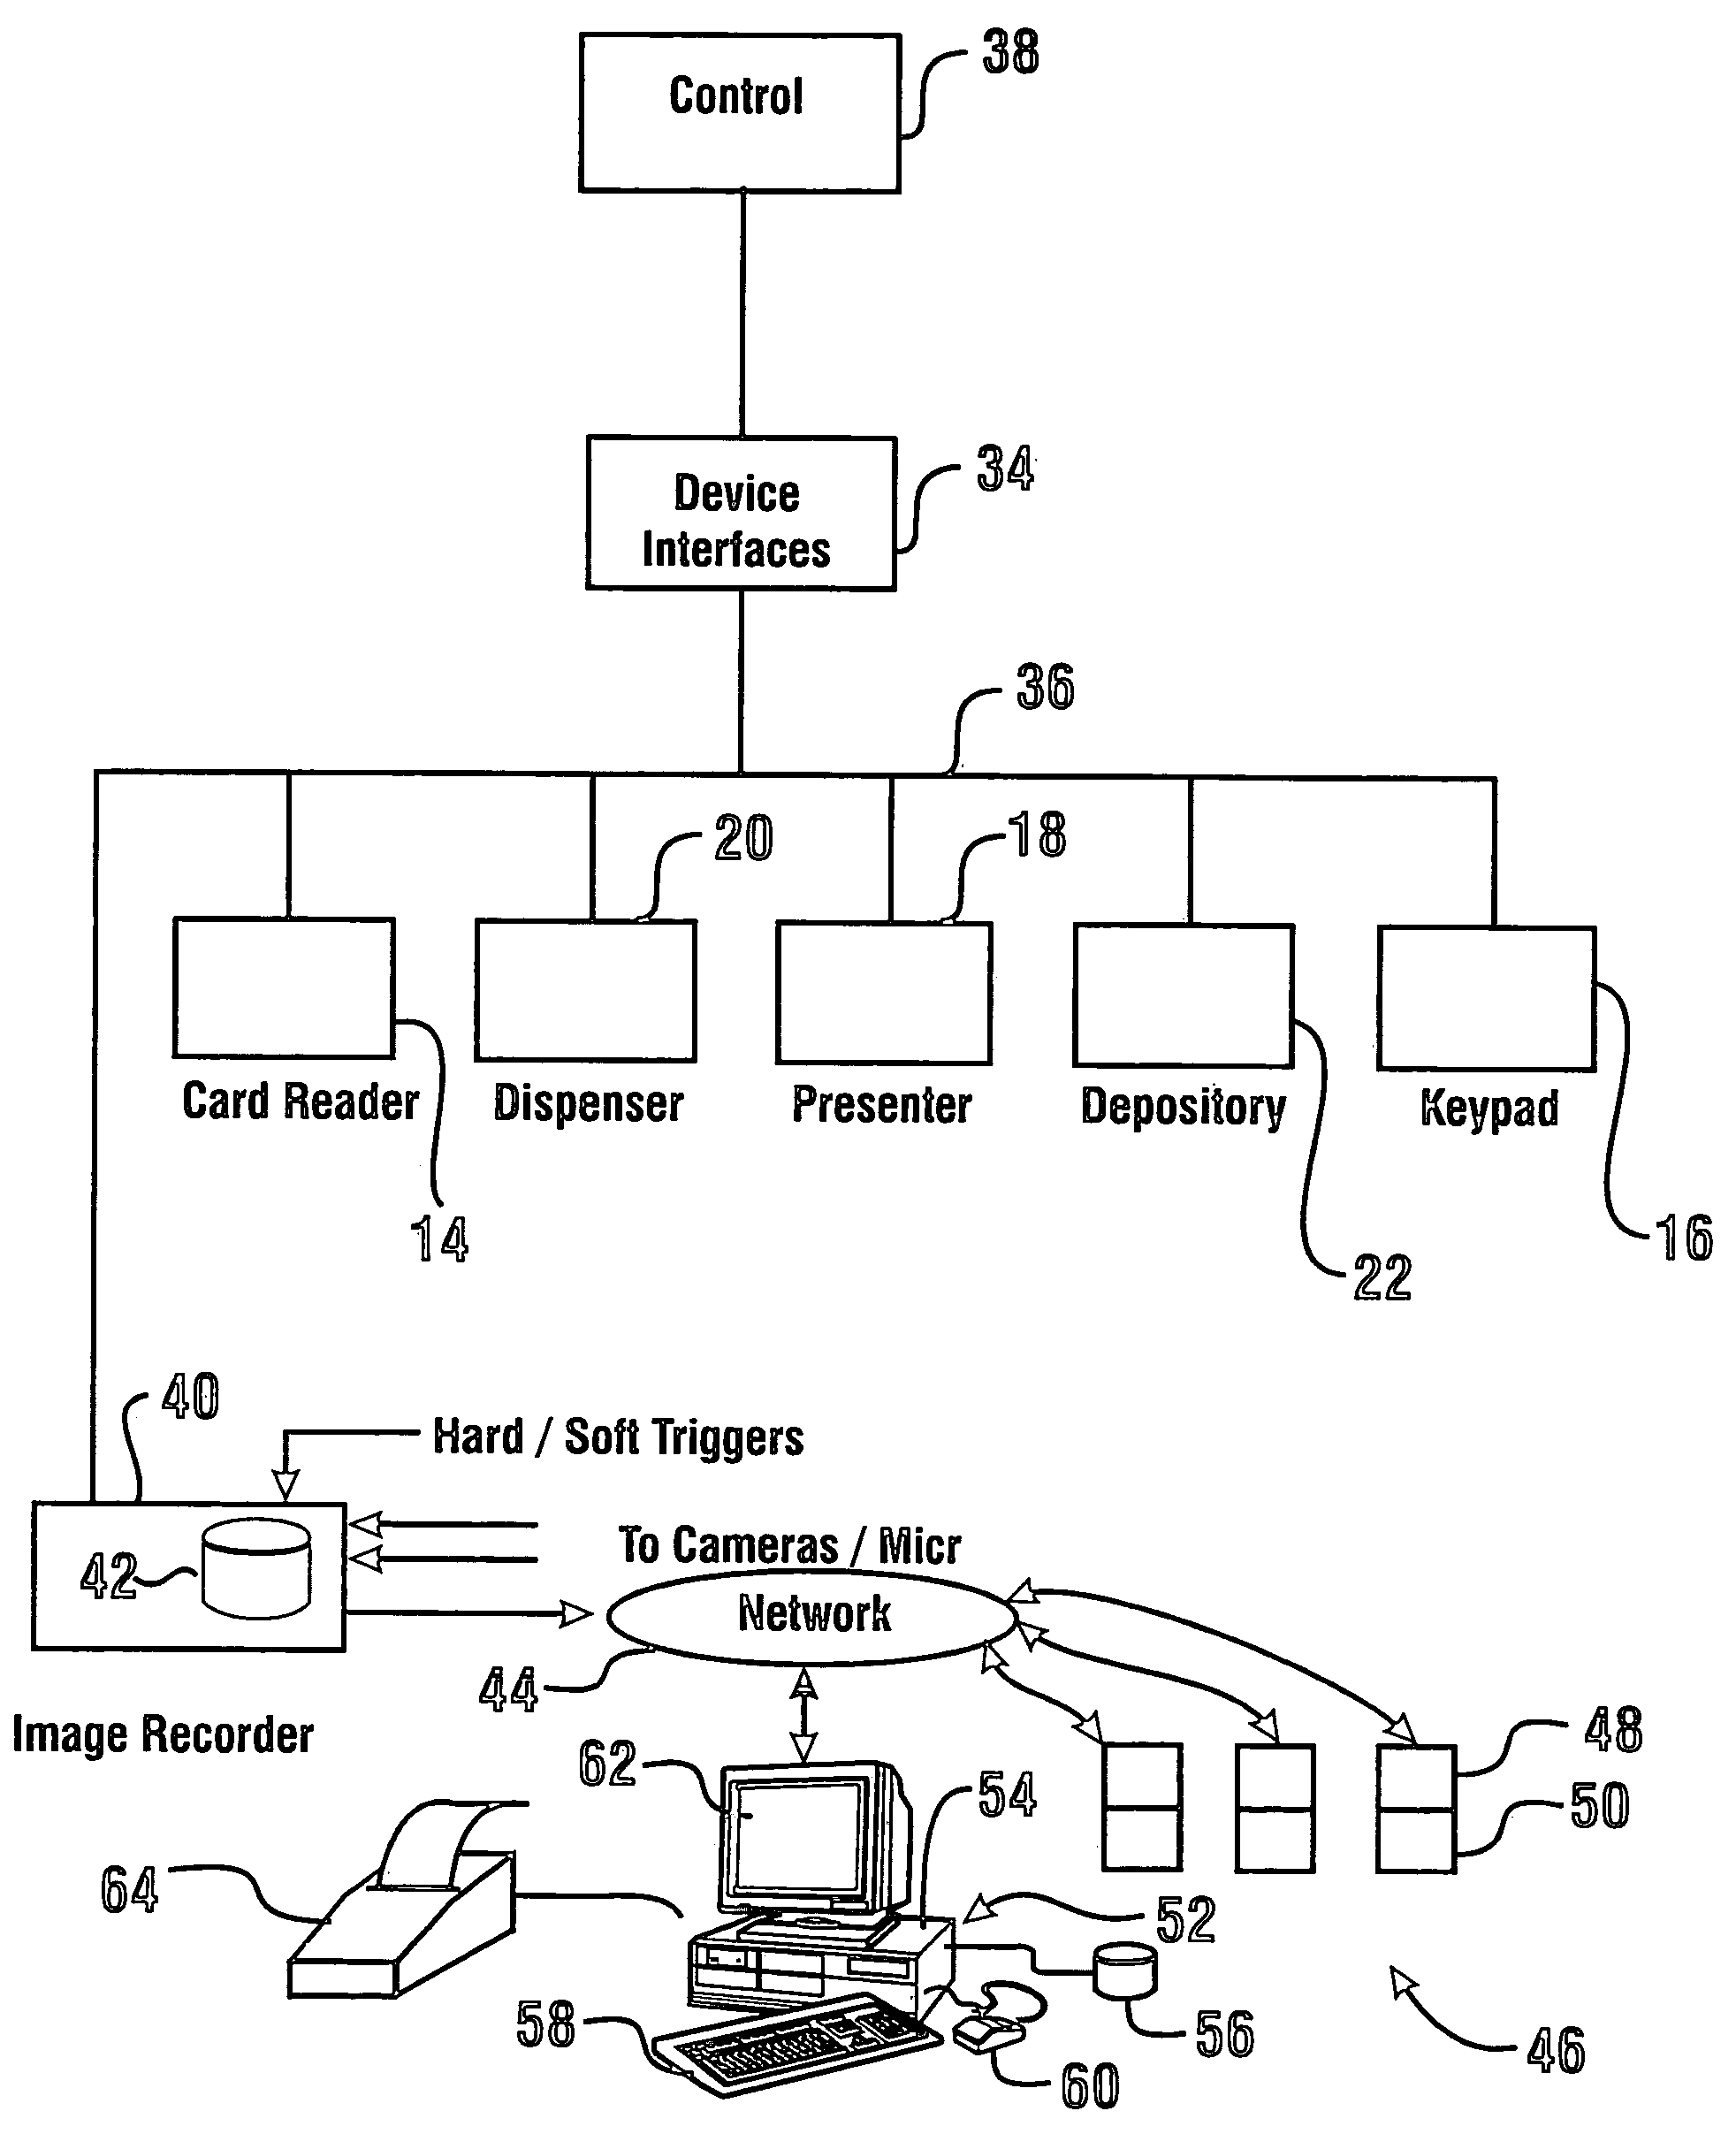 System and method for capturing and searching image data associated with transactions